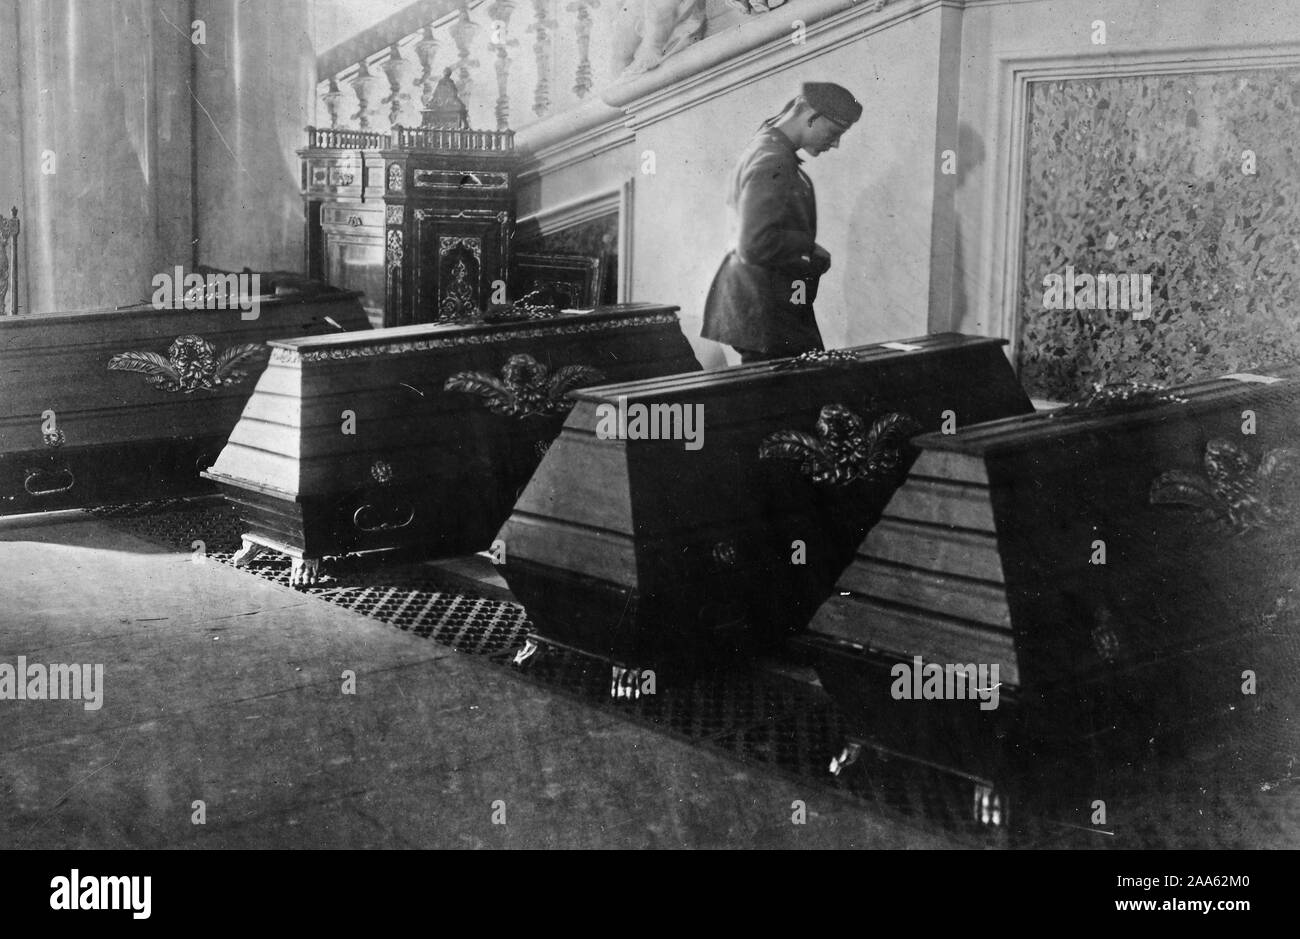 German Republic - Coffins of the killed Spartacus soldiers and sailors in famous White Hall of the Kaiser's palace, Berlin, Germany ca. 1919 Stock Photo